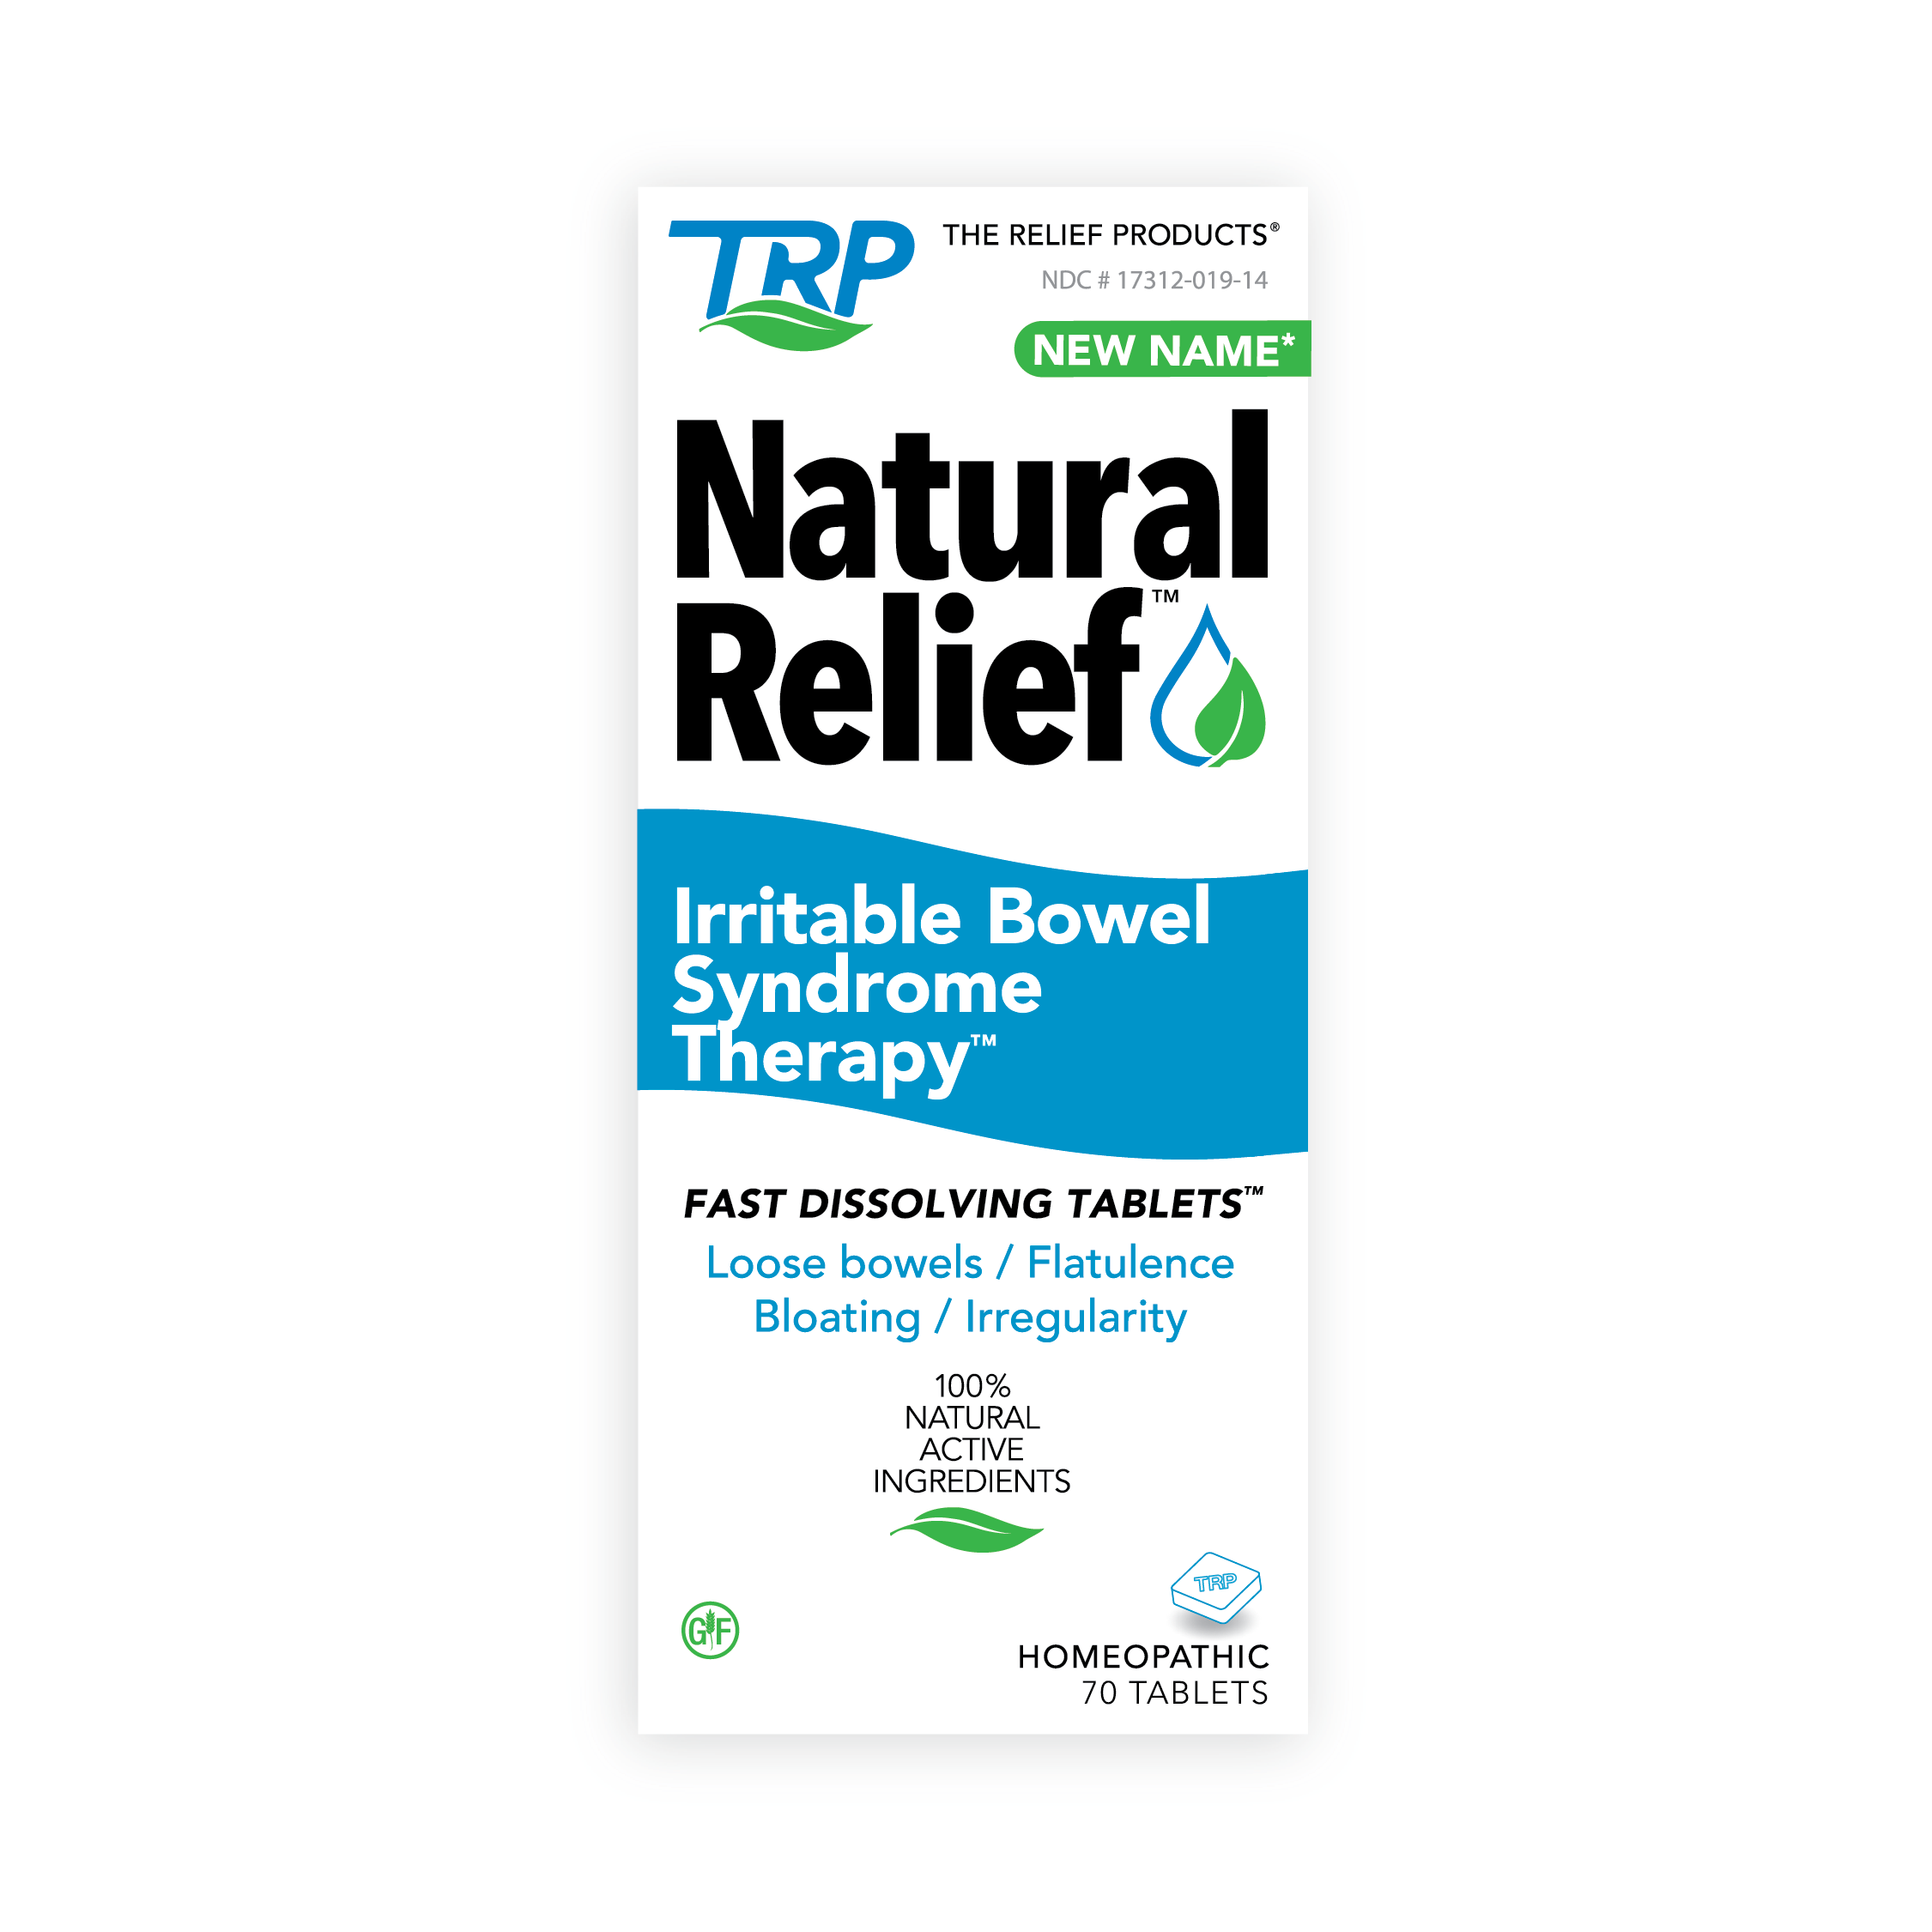 TRP Company Irritable Bowel Syndrome Therapy 70 Tablets - image 2 of 5